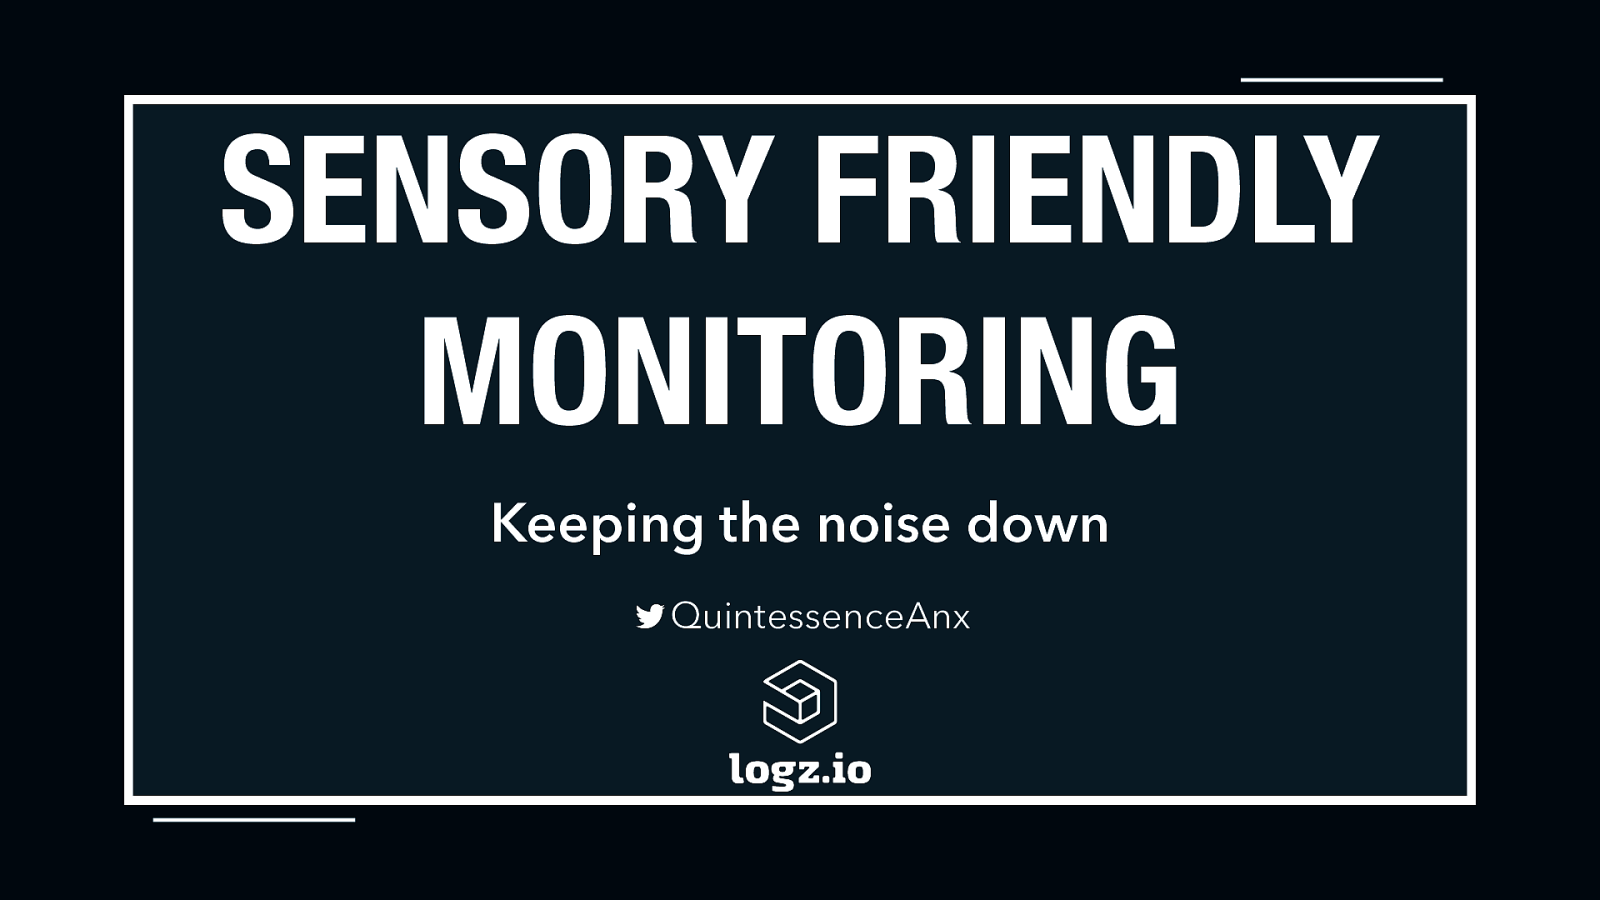 Sensory Friendly Monitoring: Keeping the Noise Down